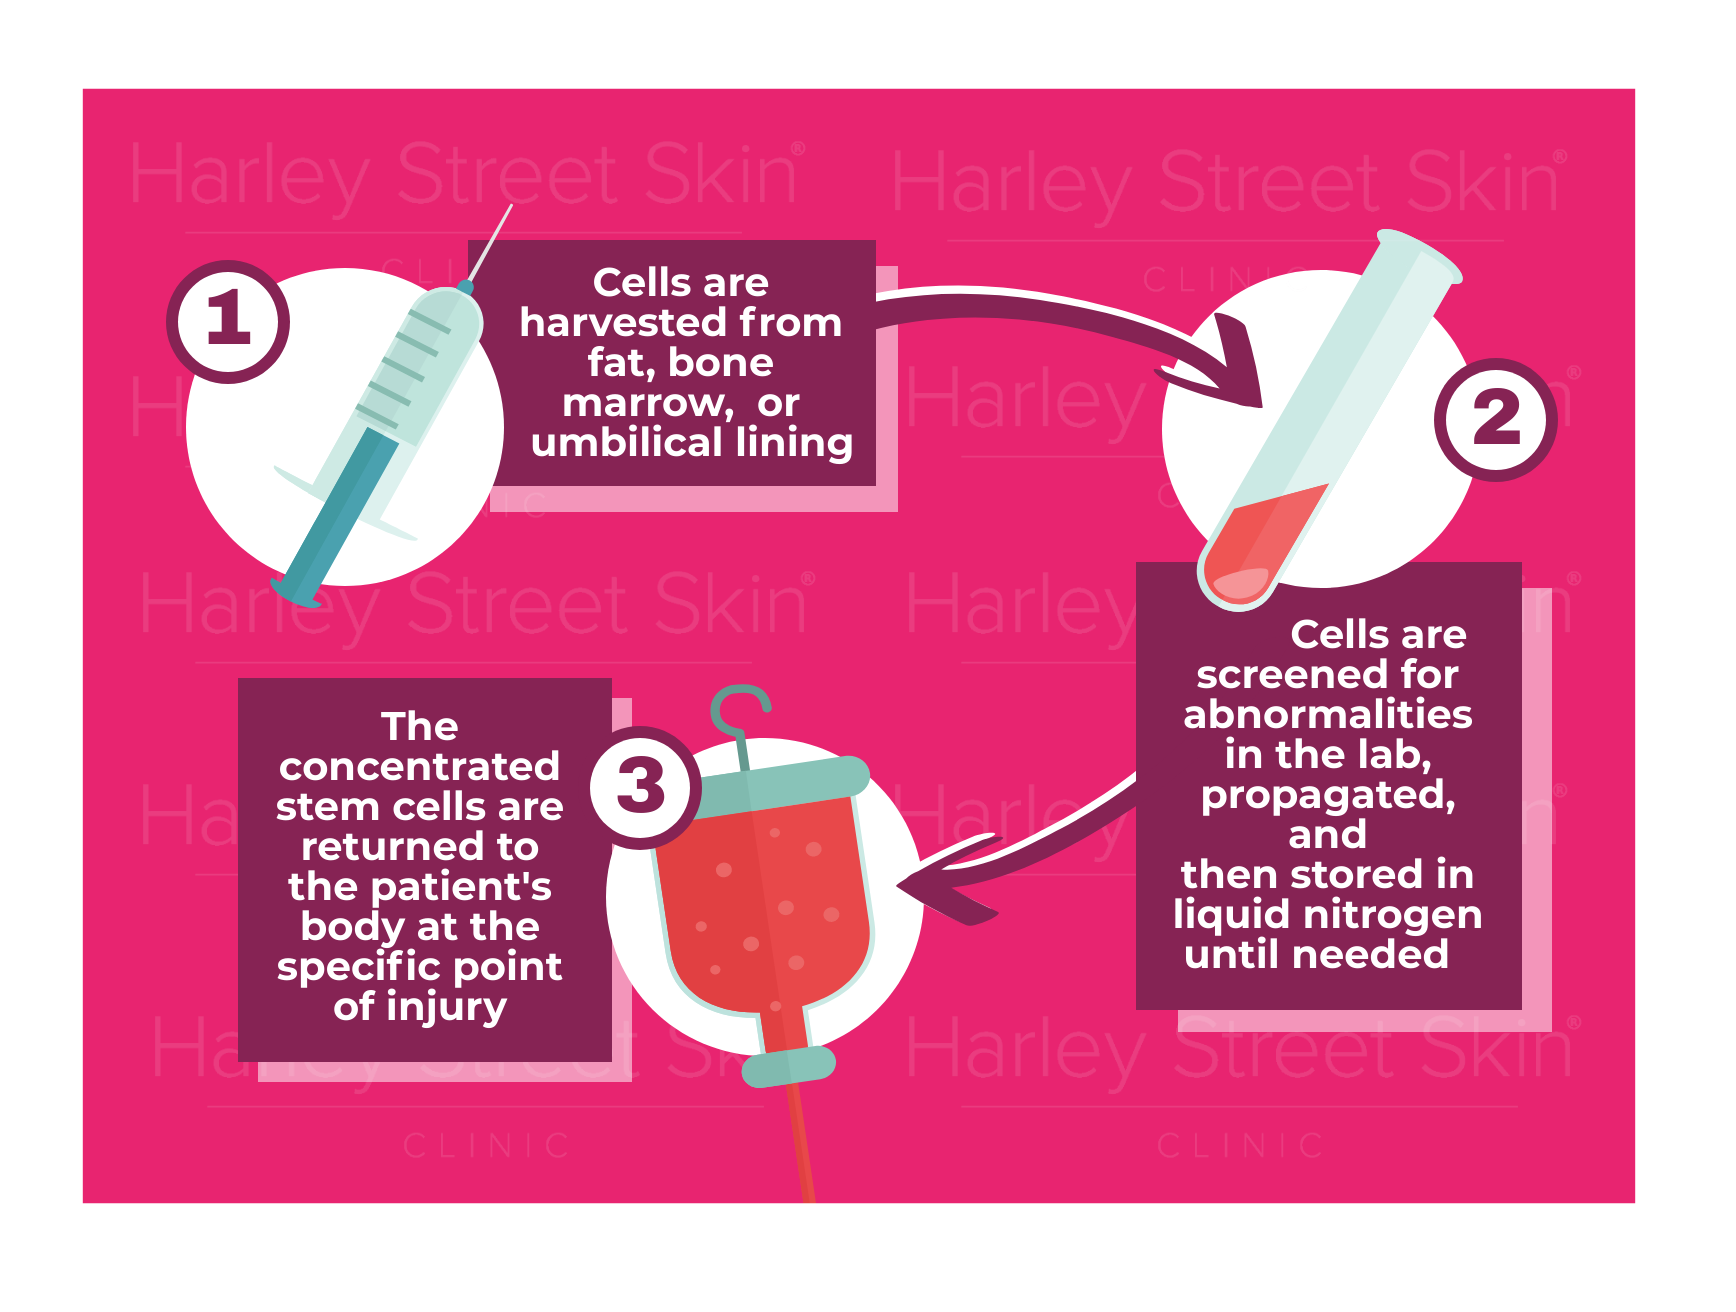 The 3 Stages of the Stem Cell Process